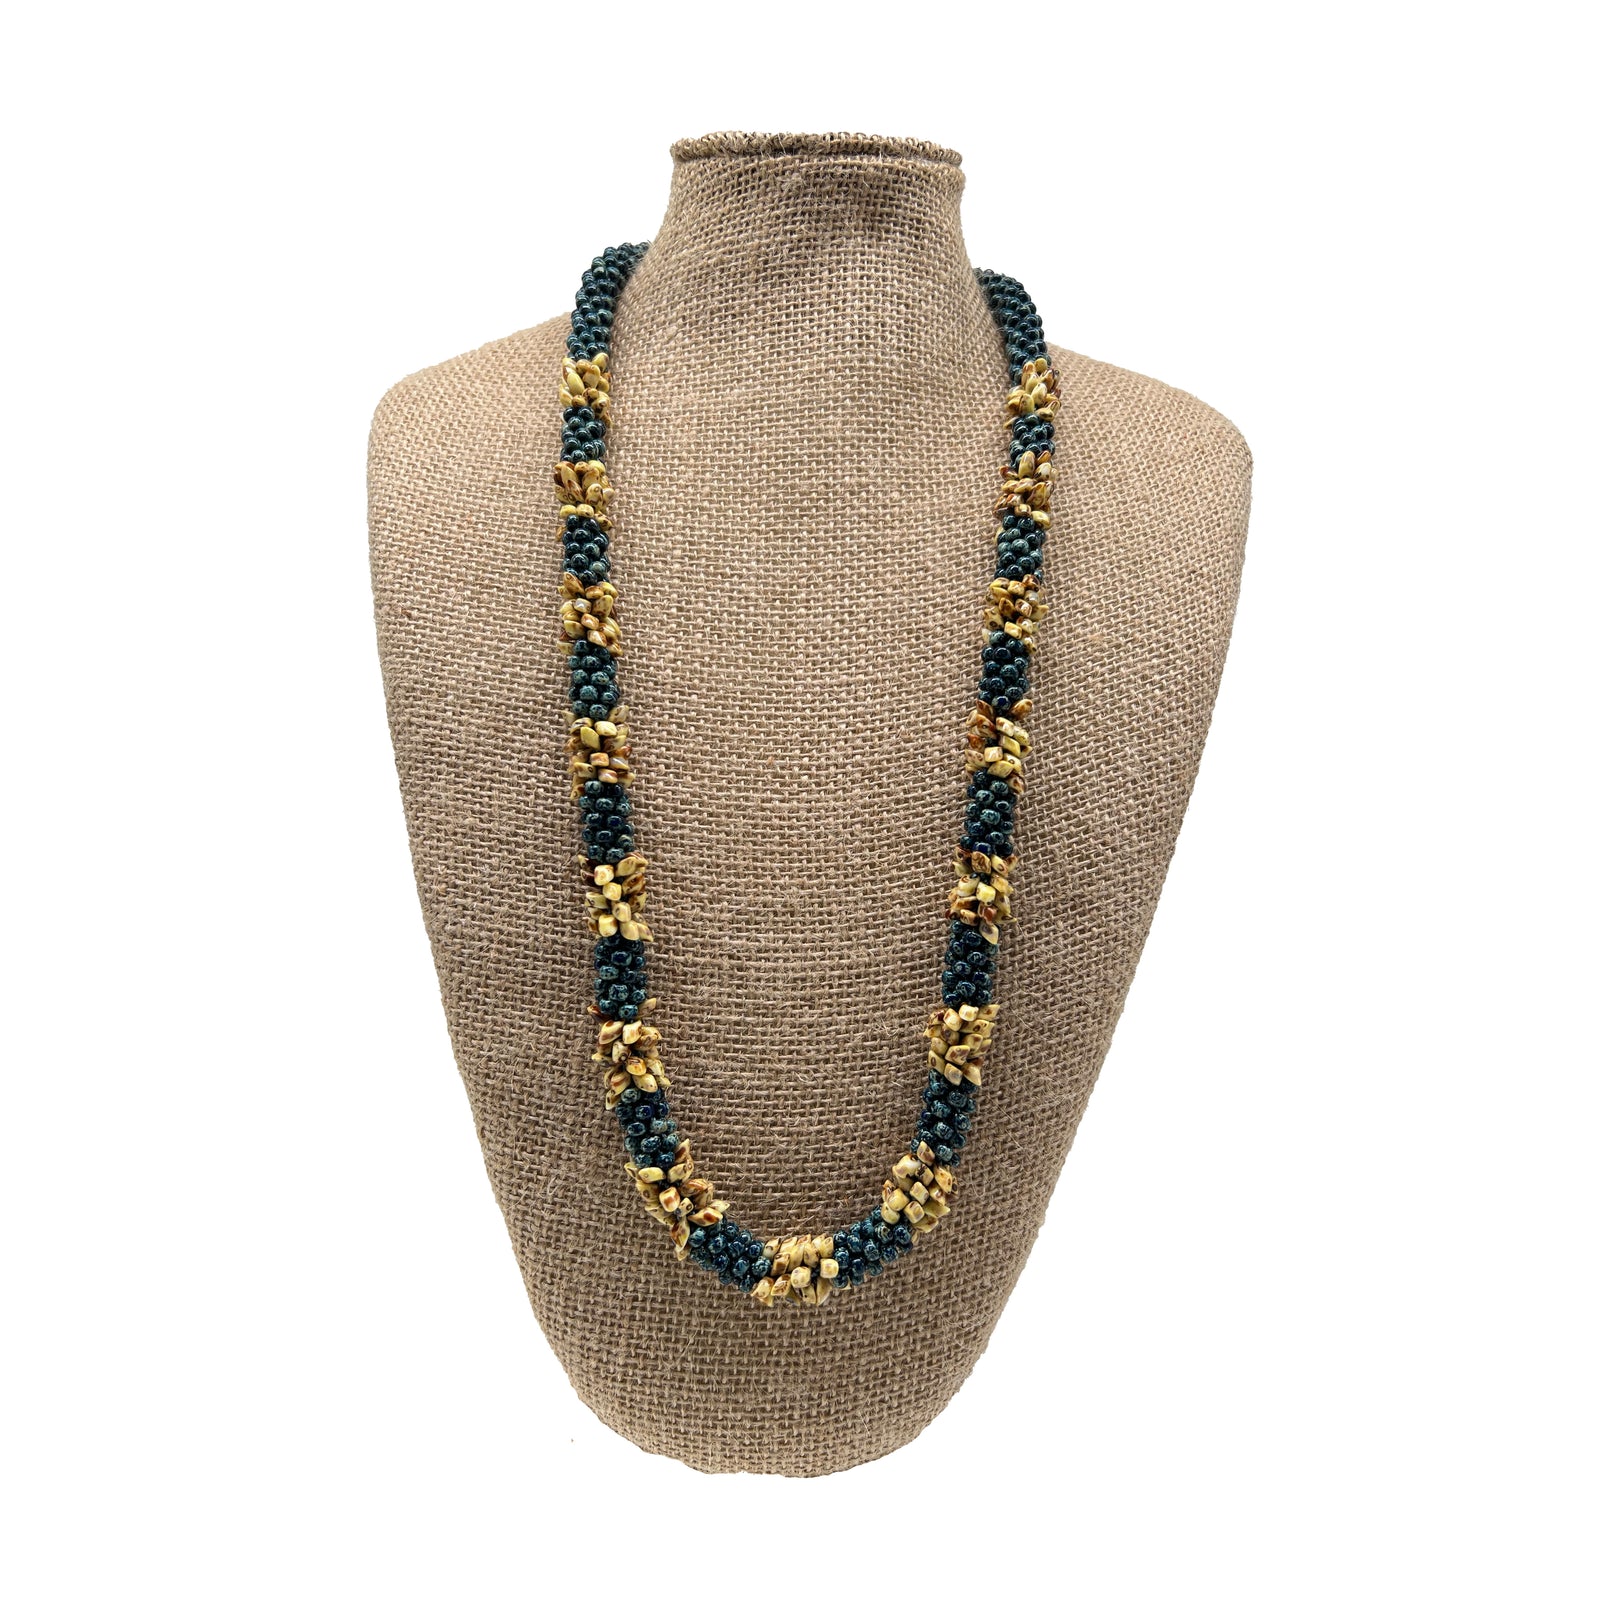 Pop-Up Mākeke - Akalei Designs - Island Inspired Cobalt Blue with Yellow Picasso Segmented Kumihimo Necklace Lei - 30in